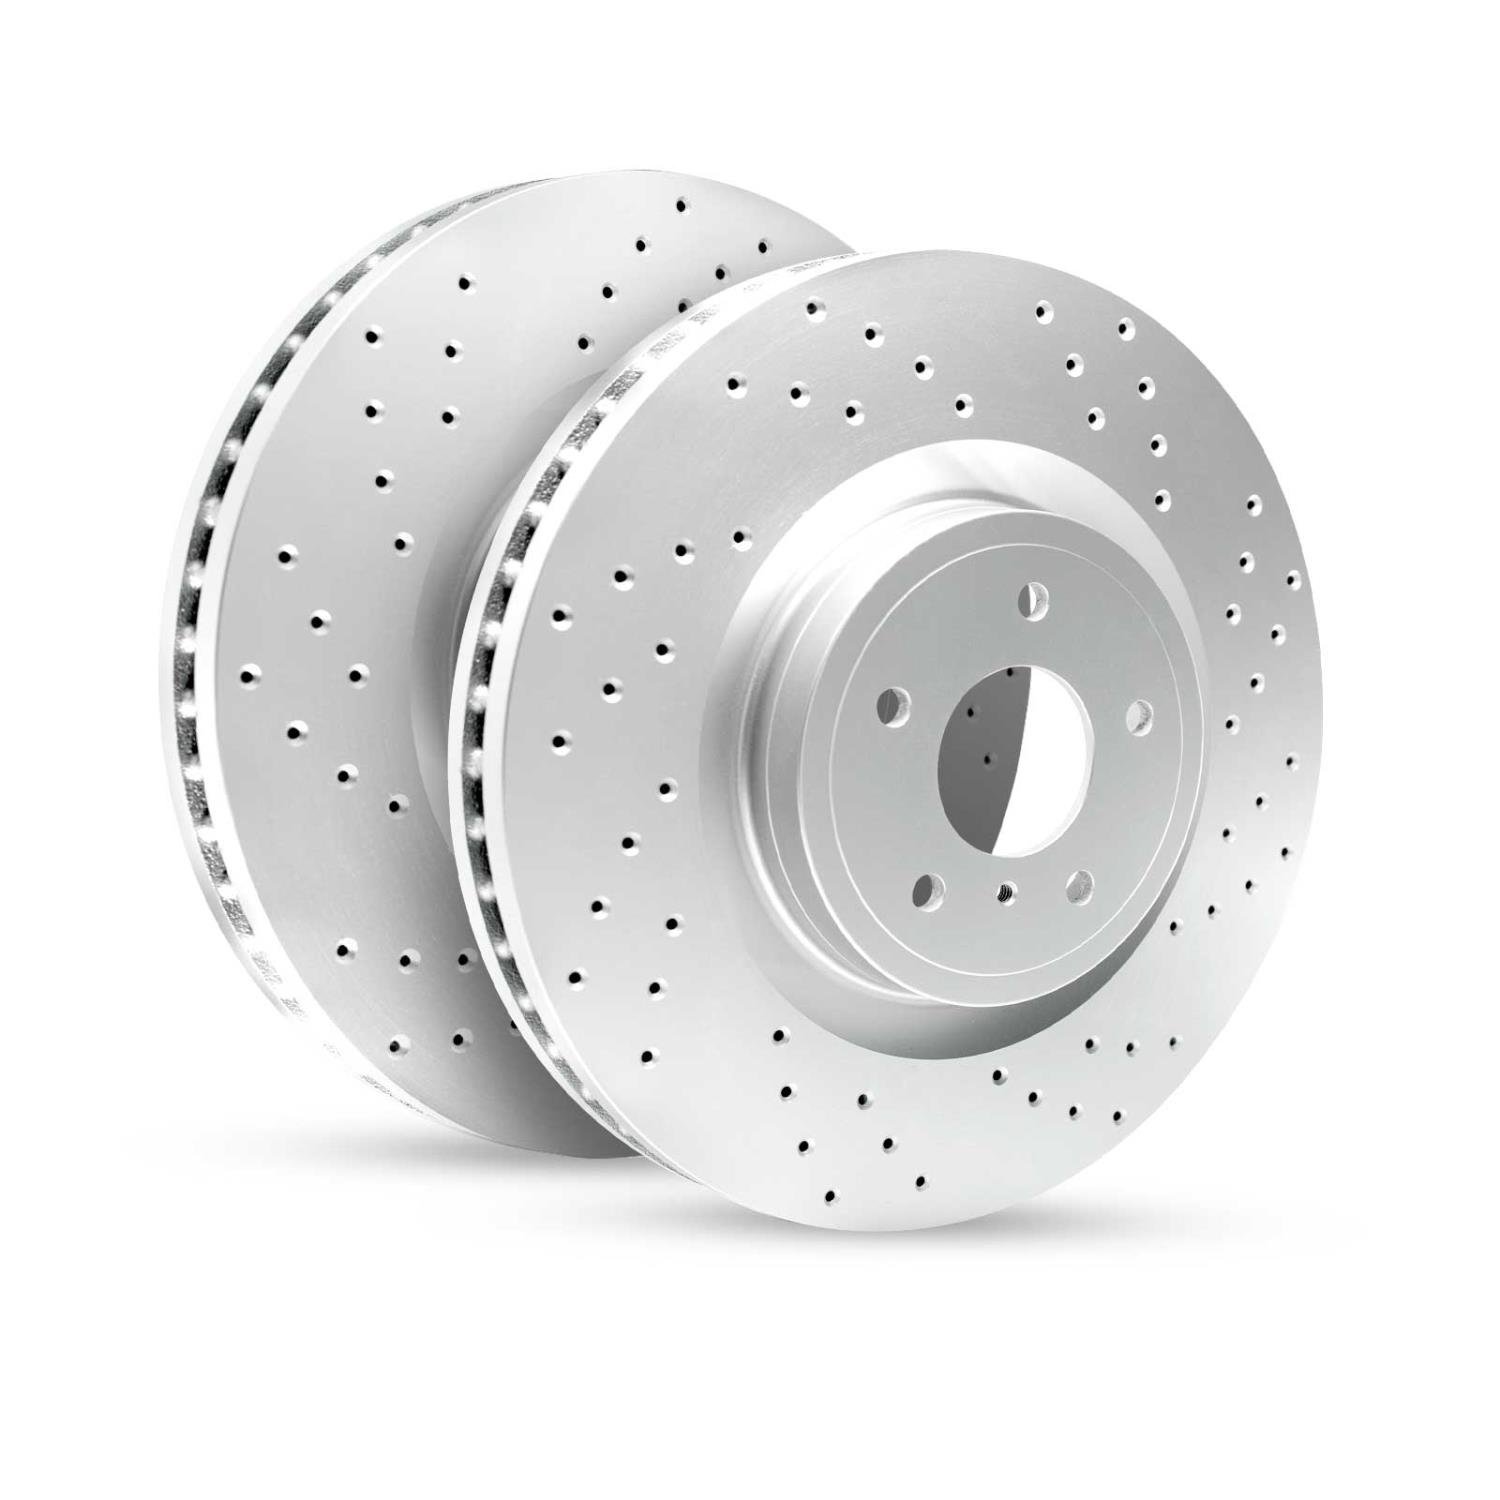 GEO-Carbon Drilled/Slotted Rotors, 1990-2005 Fits Multiple